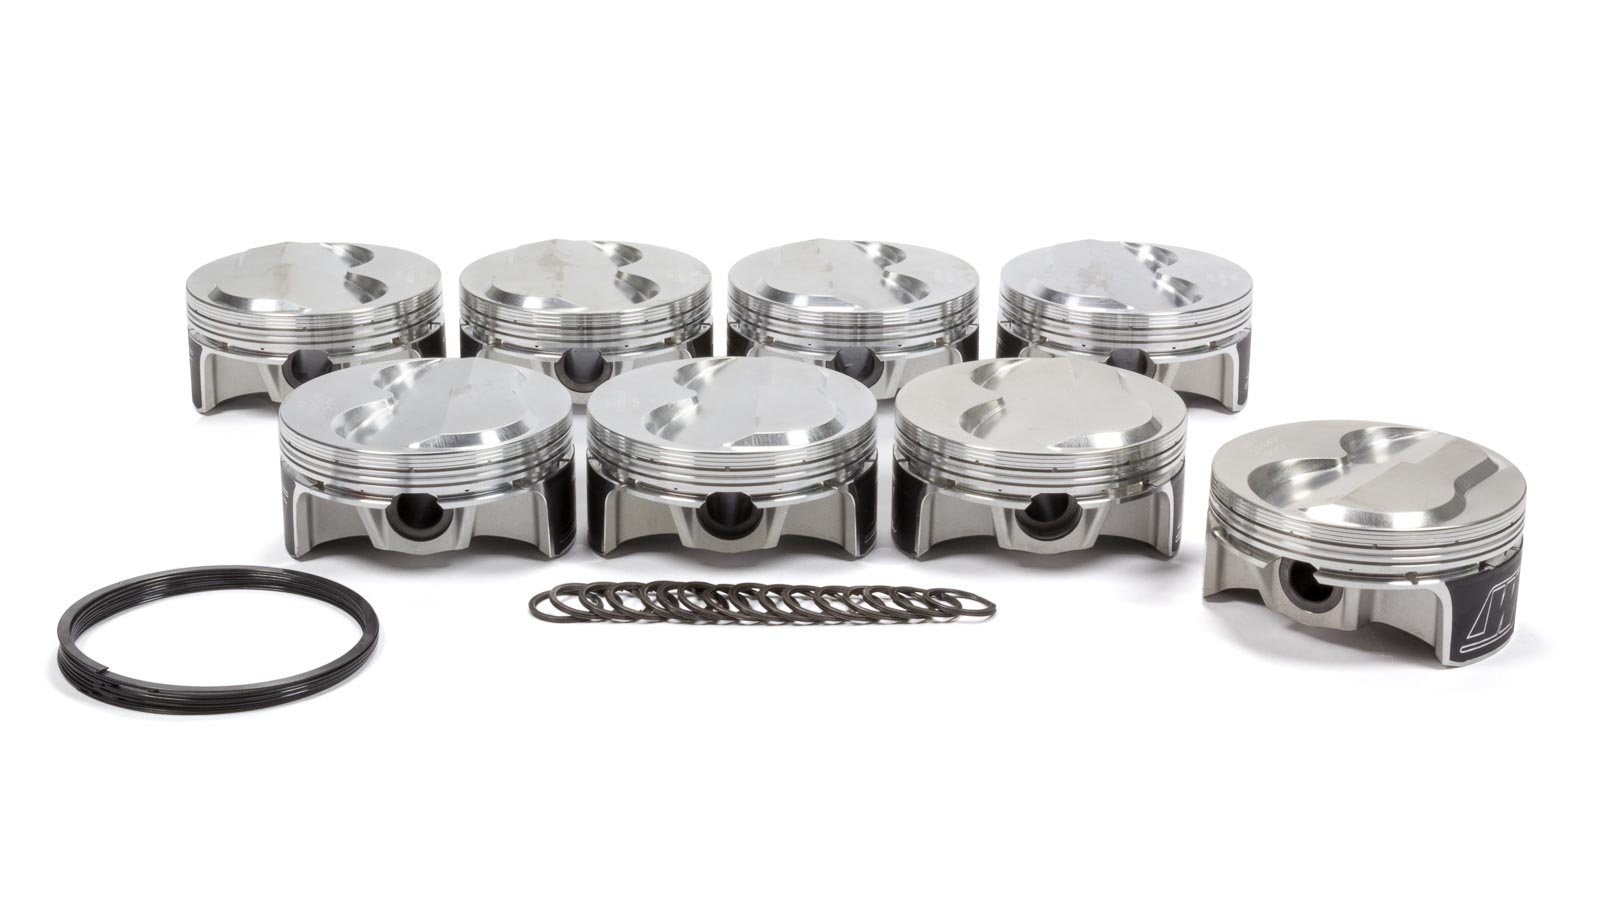 Wiseco VT1757 4 Bore 10.5:1 Compression Ratio Flat Top Forged Piston Kit with Top End Gasket